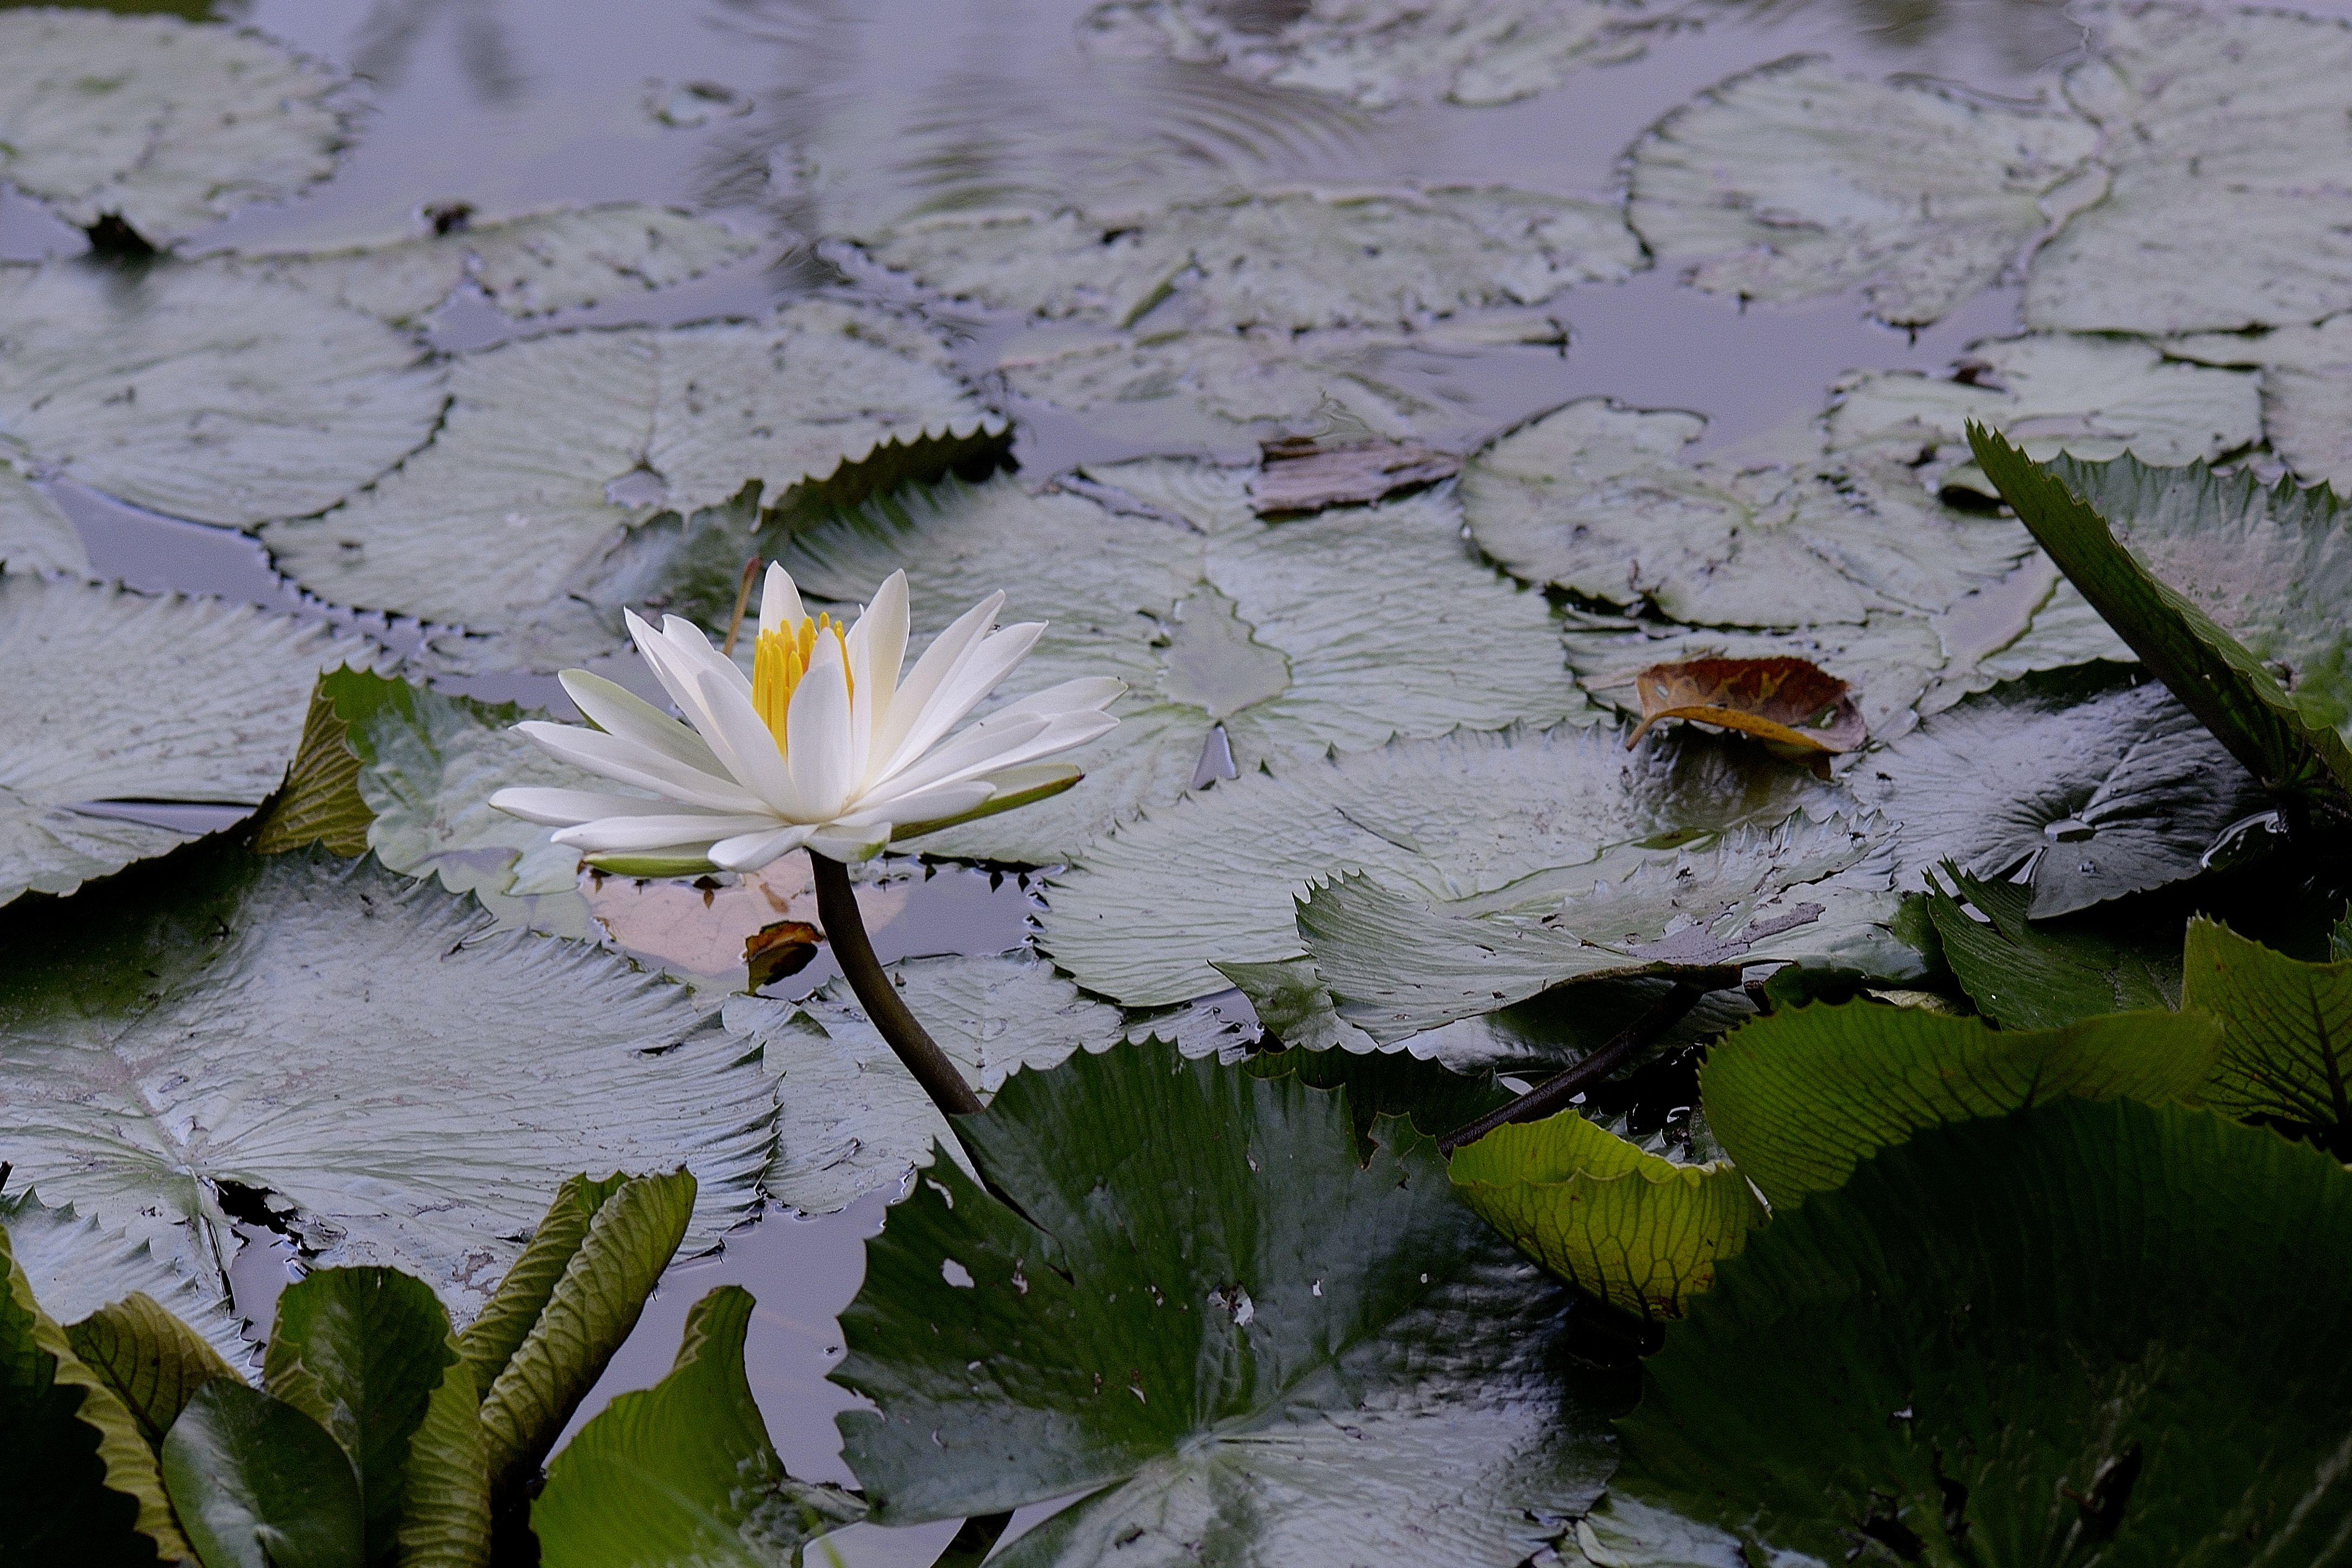 The pond is overgrown with lilies - free photo